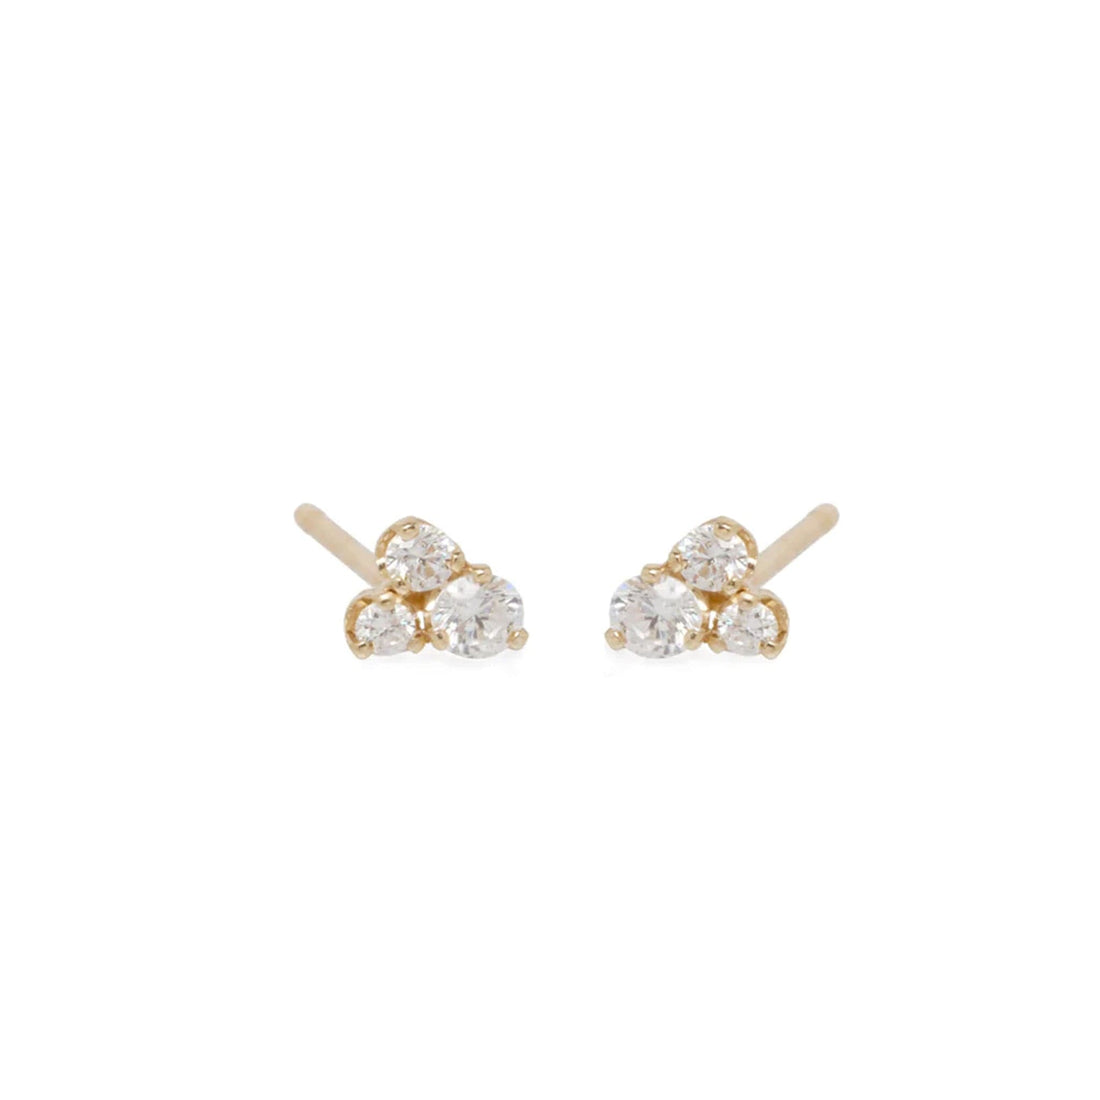 Three Diamond Cluster Yellow Gold Stud Earrings by Zoe Chicco